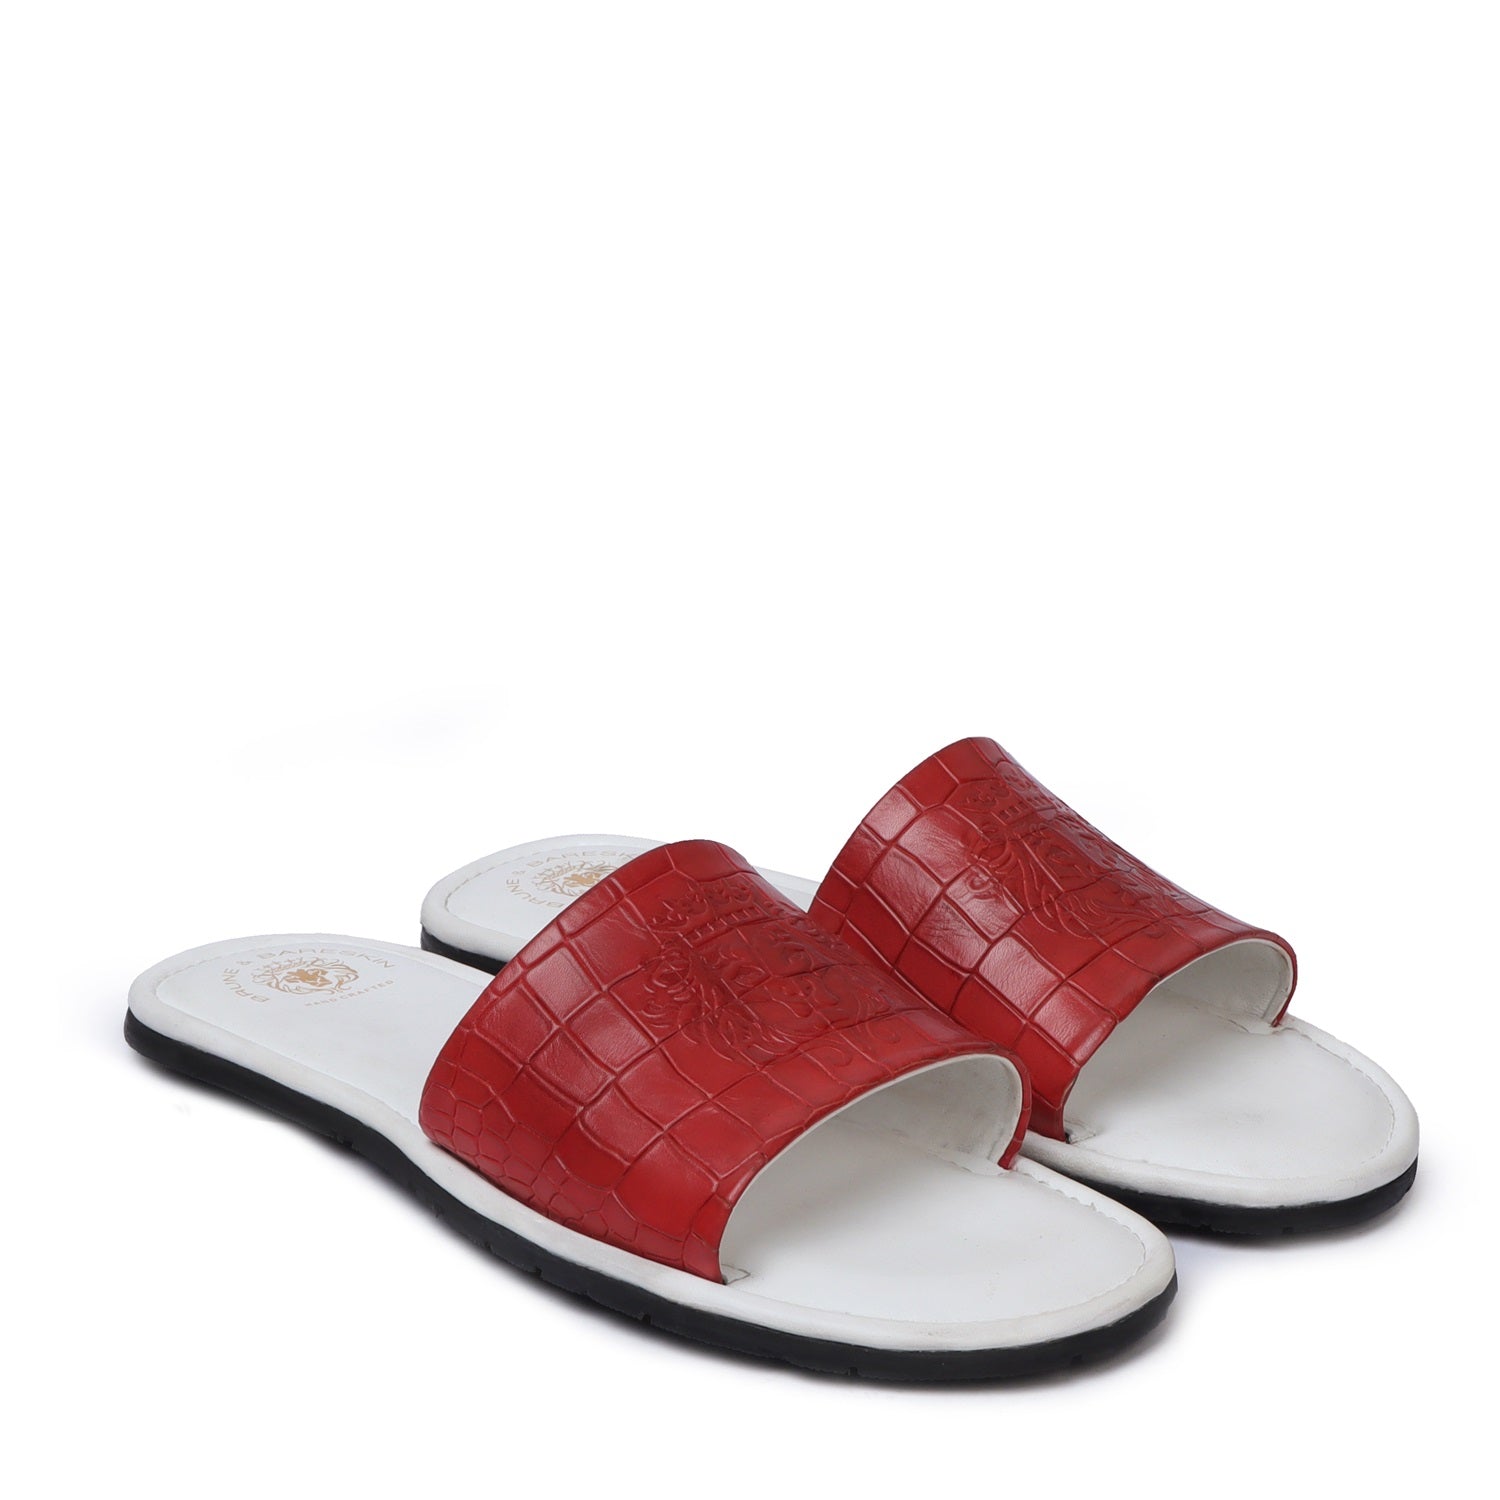 Dual Color Red/White Whole Deep Cut Croco Leather Slide-In-Slippers by Brune & Bareskin